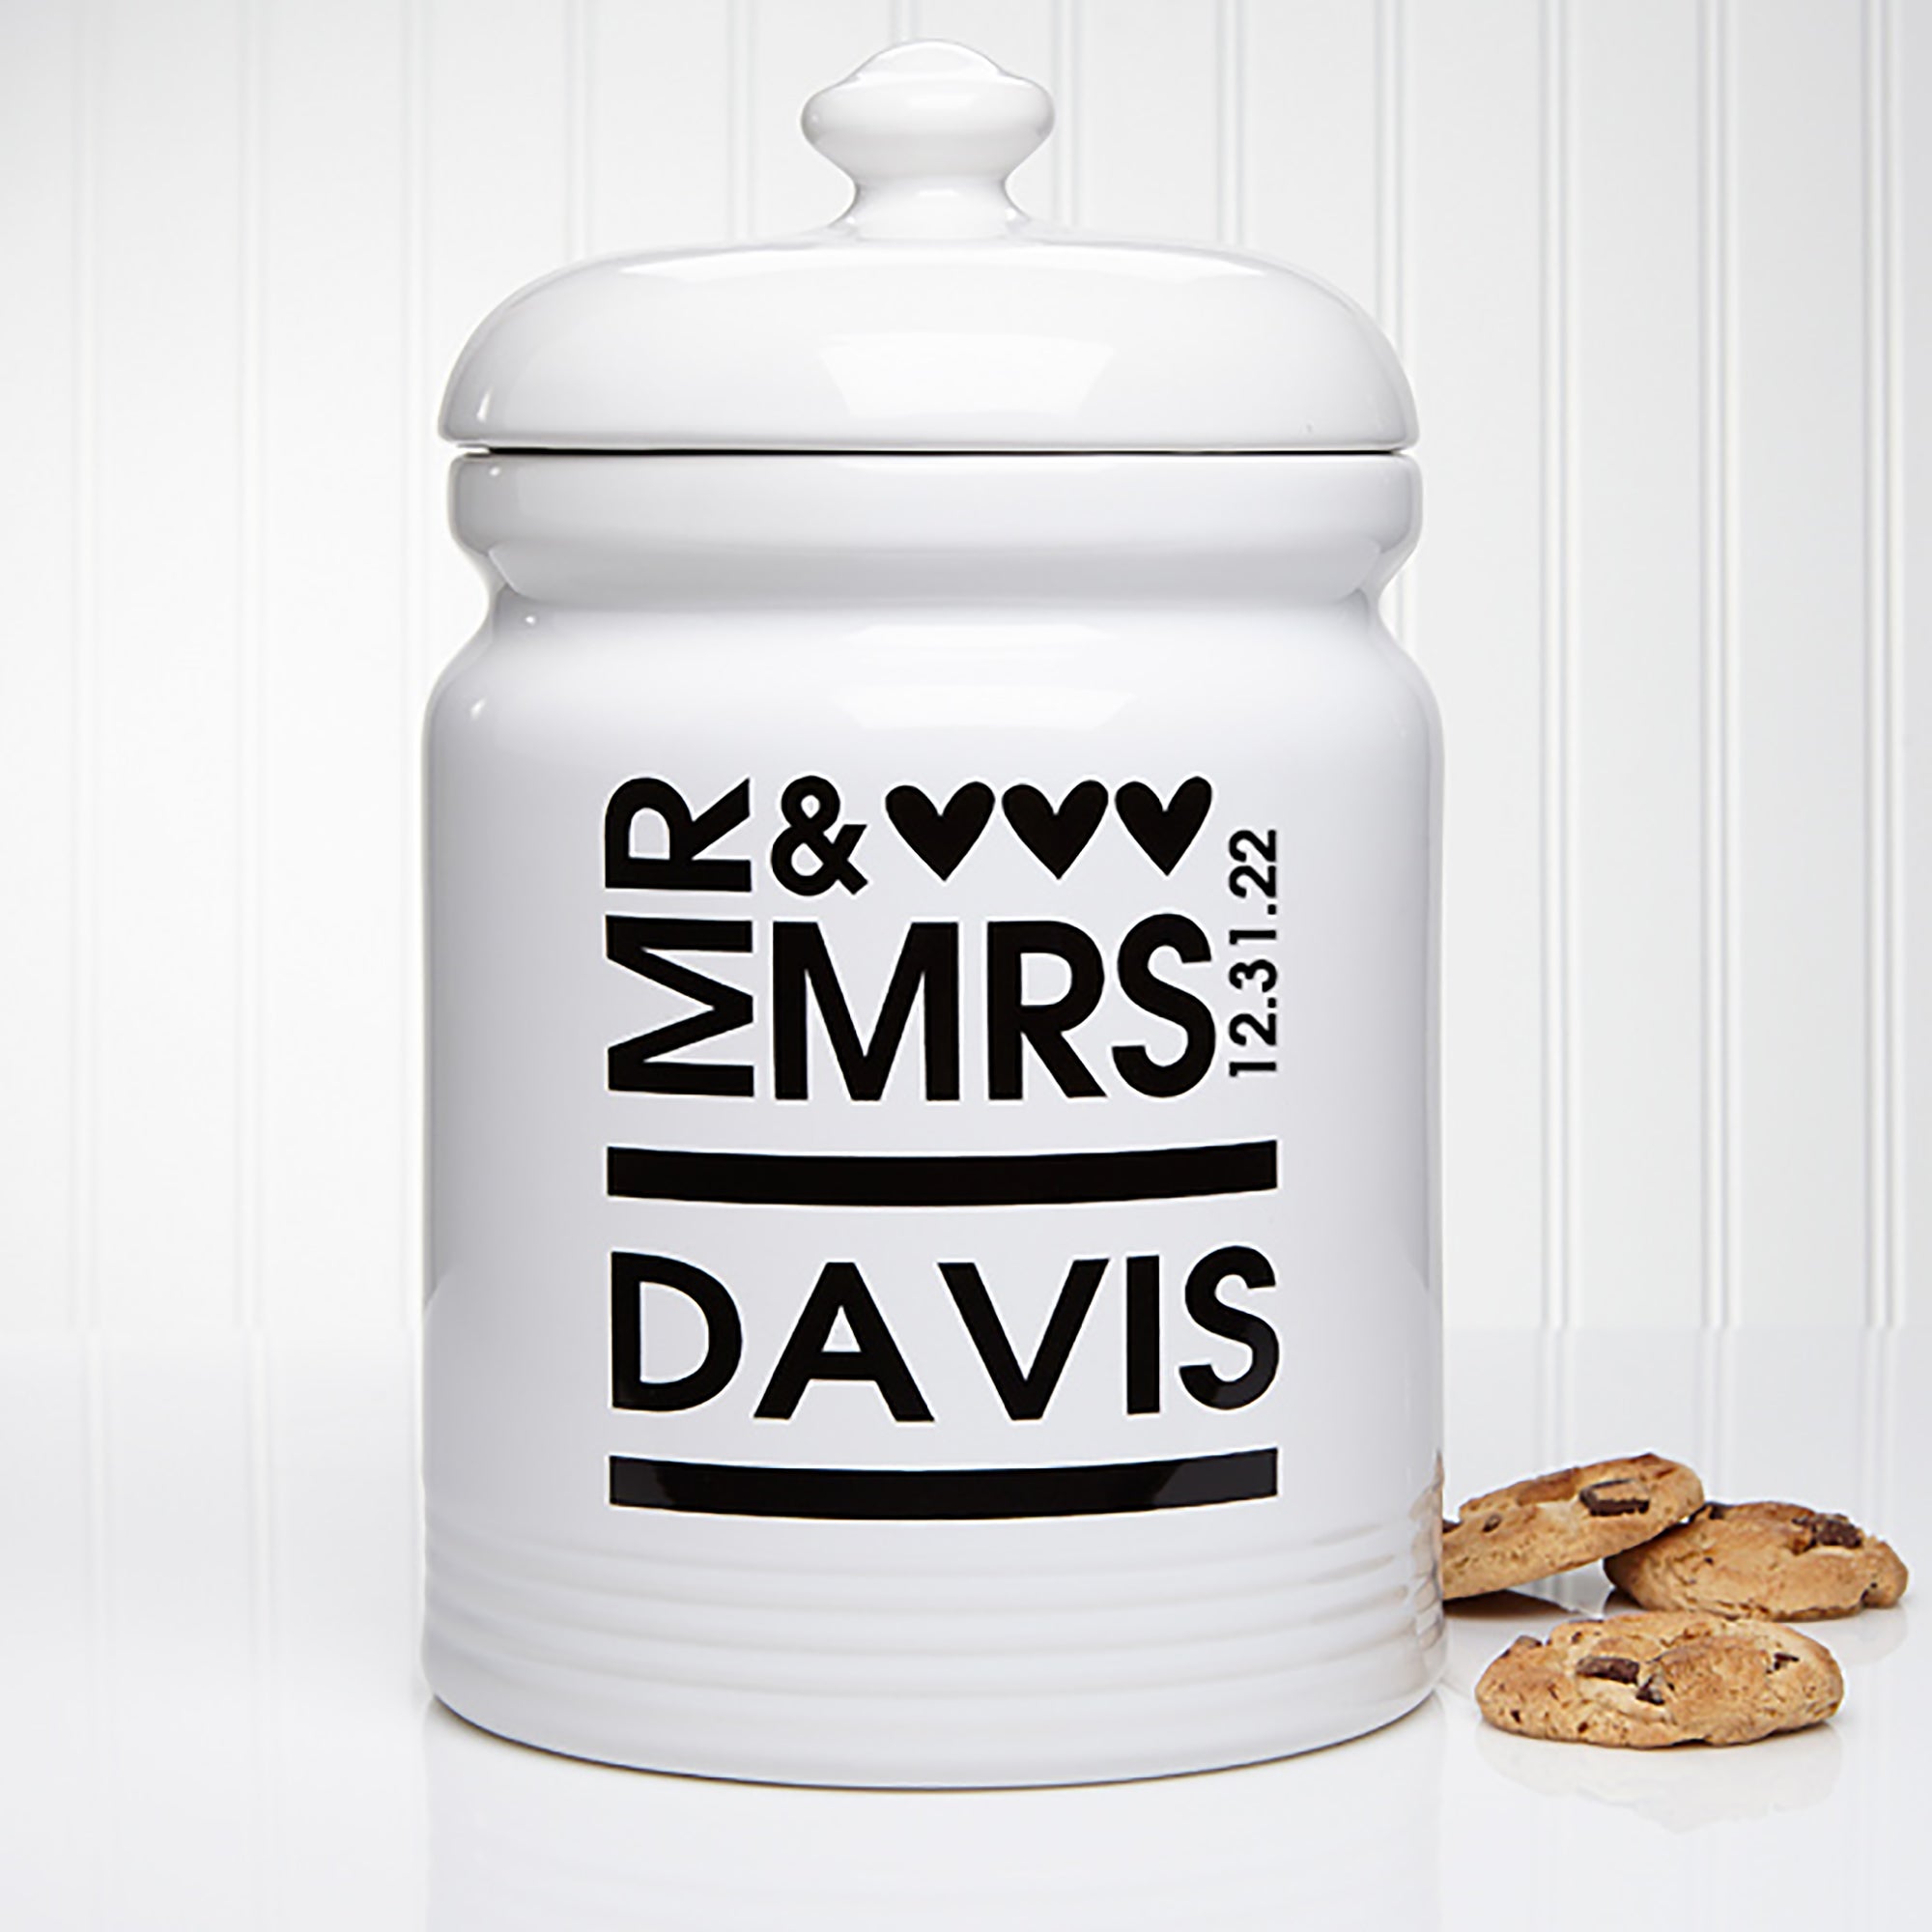 Mr. and Mrs. Personalized Cookie Jar